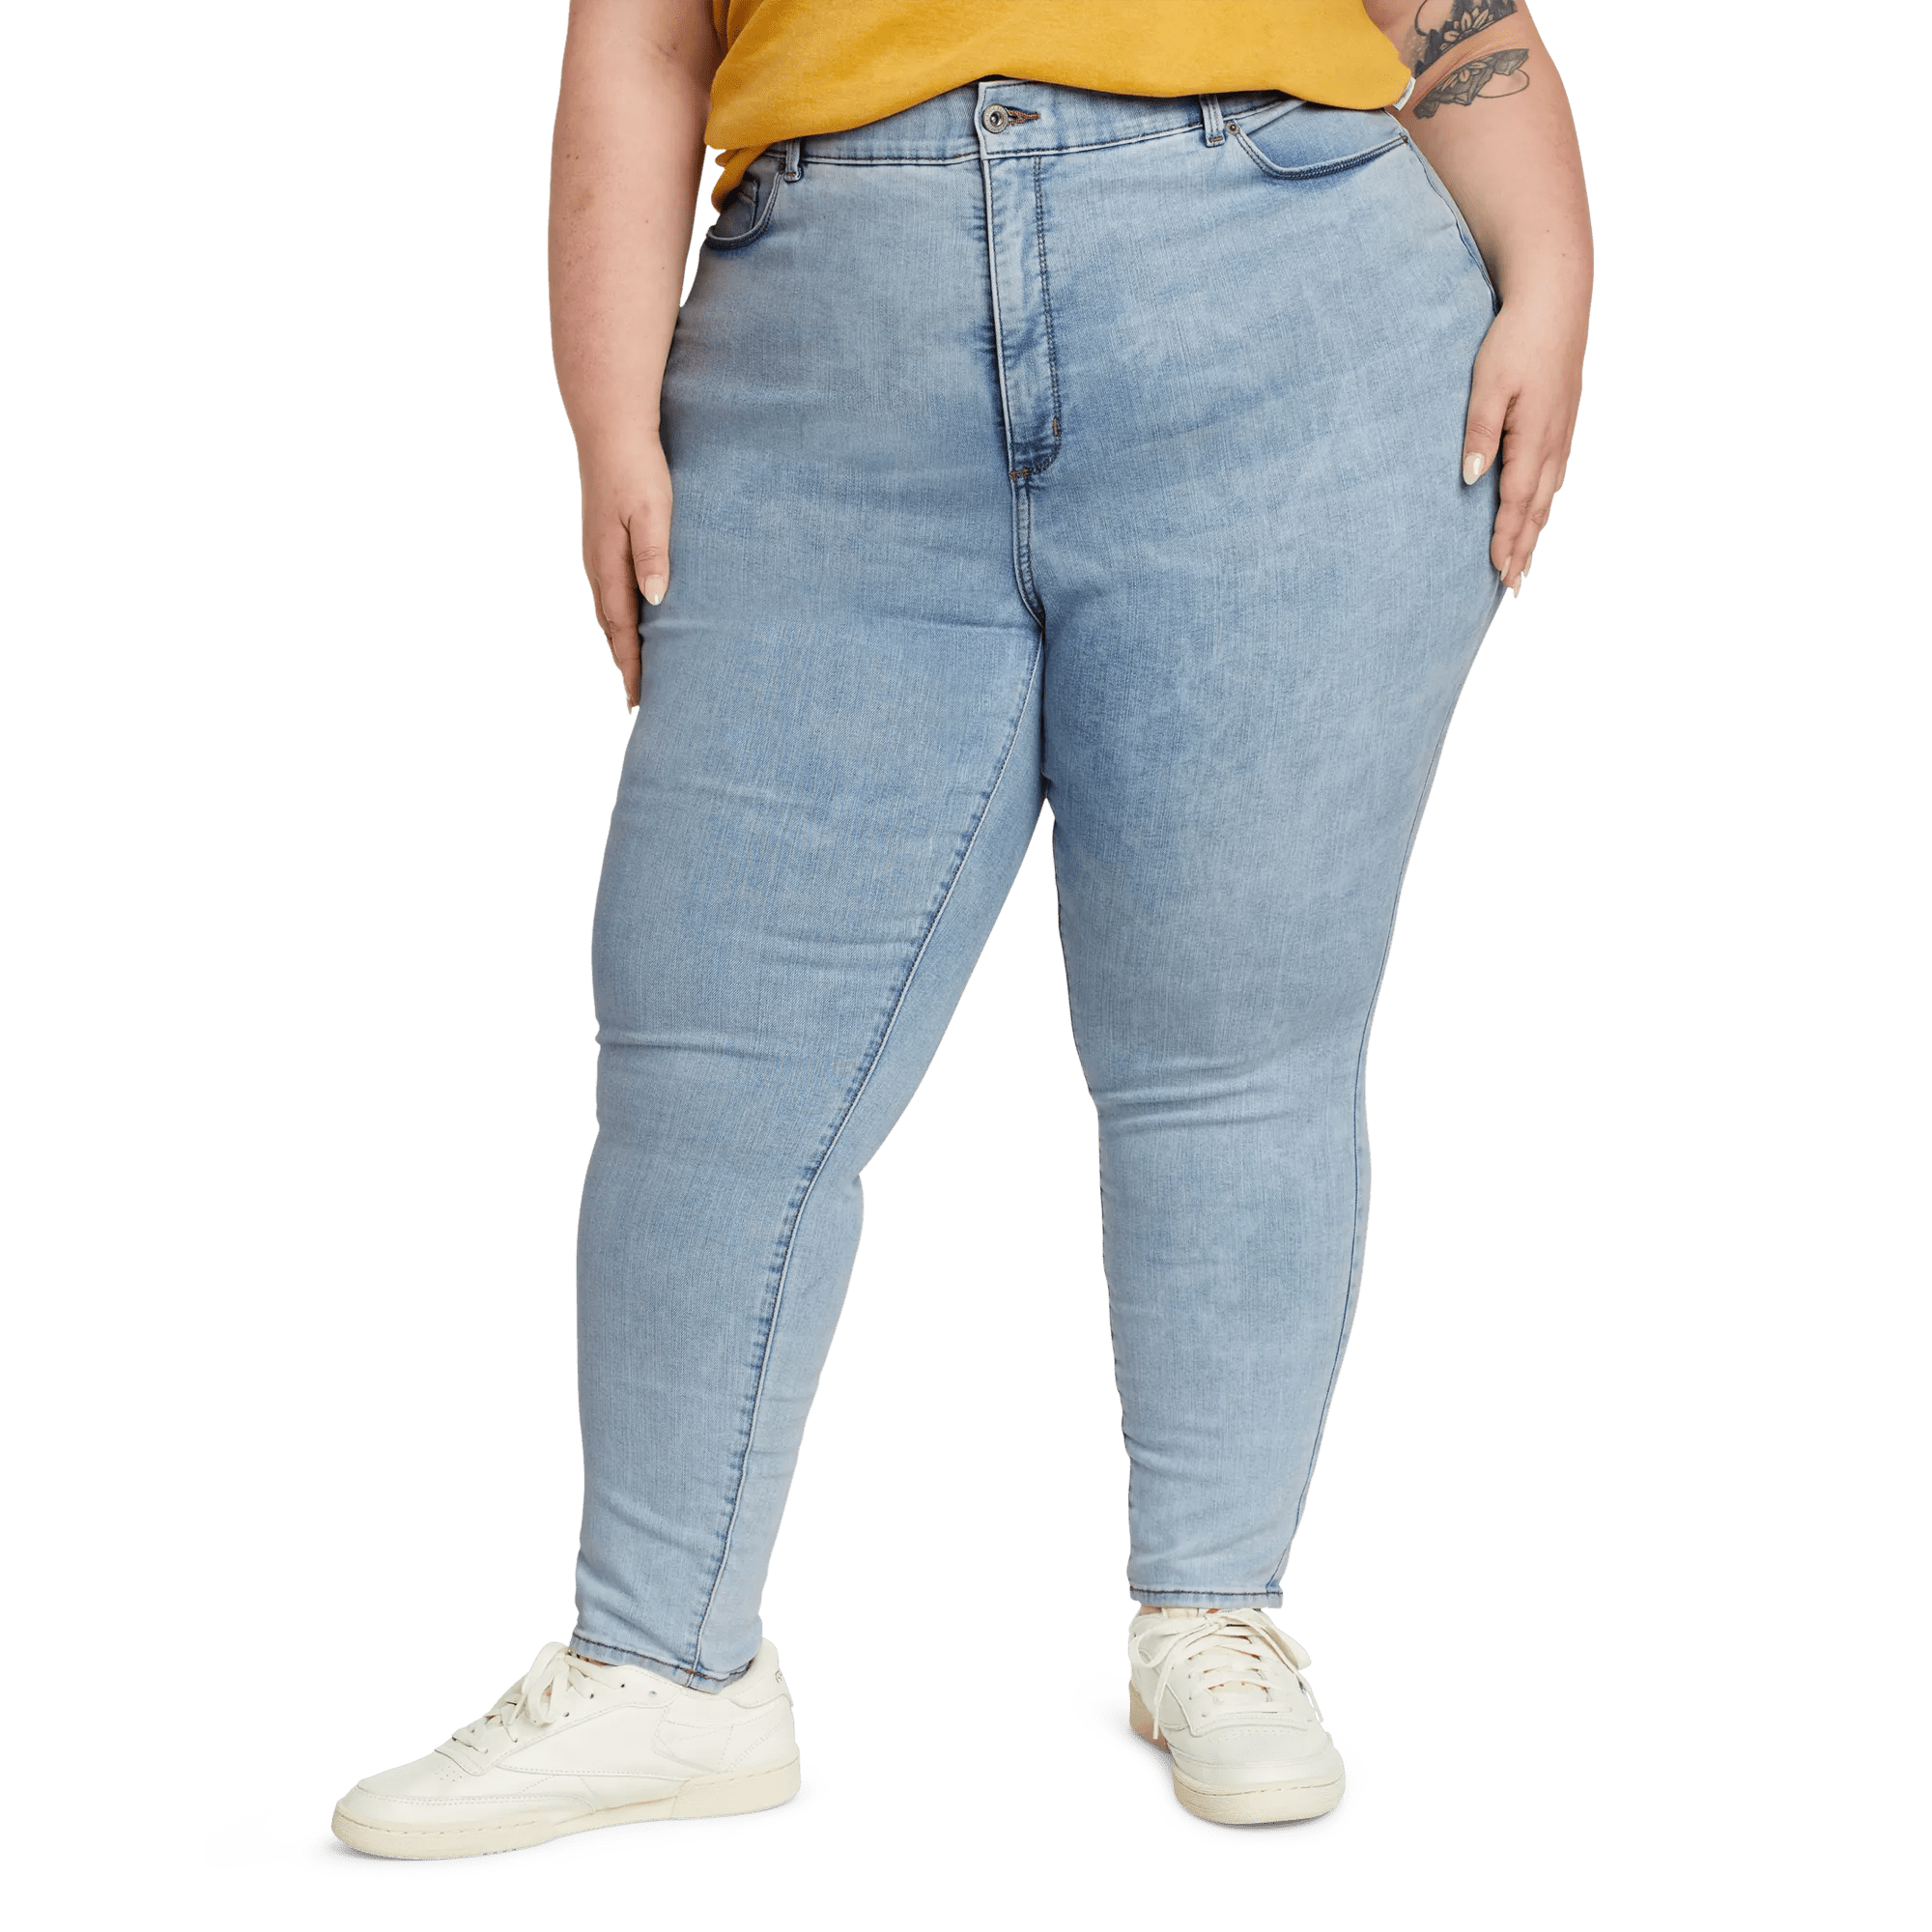 Voyager High-Rise Skinny Jeans - Slightly Curvy